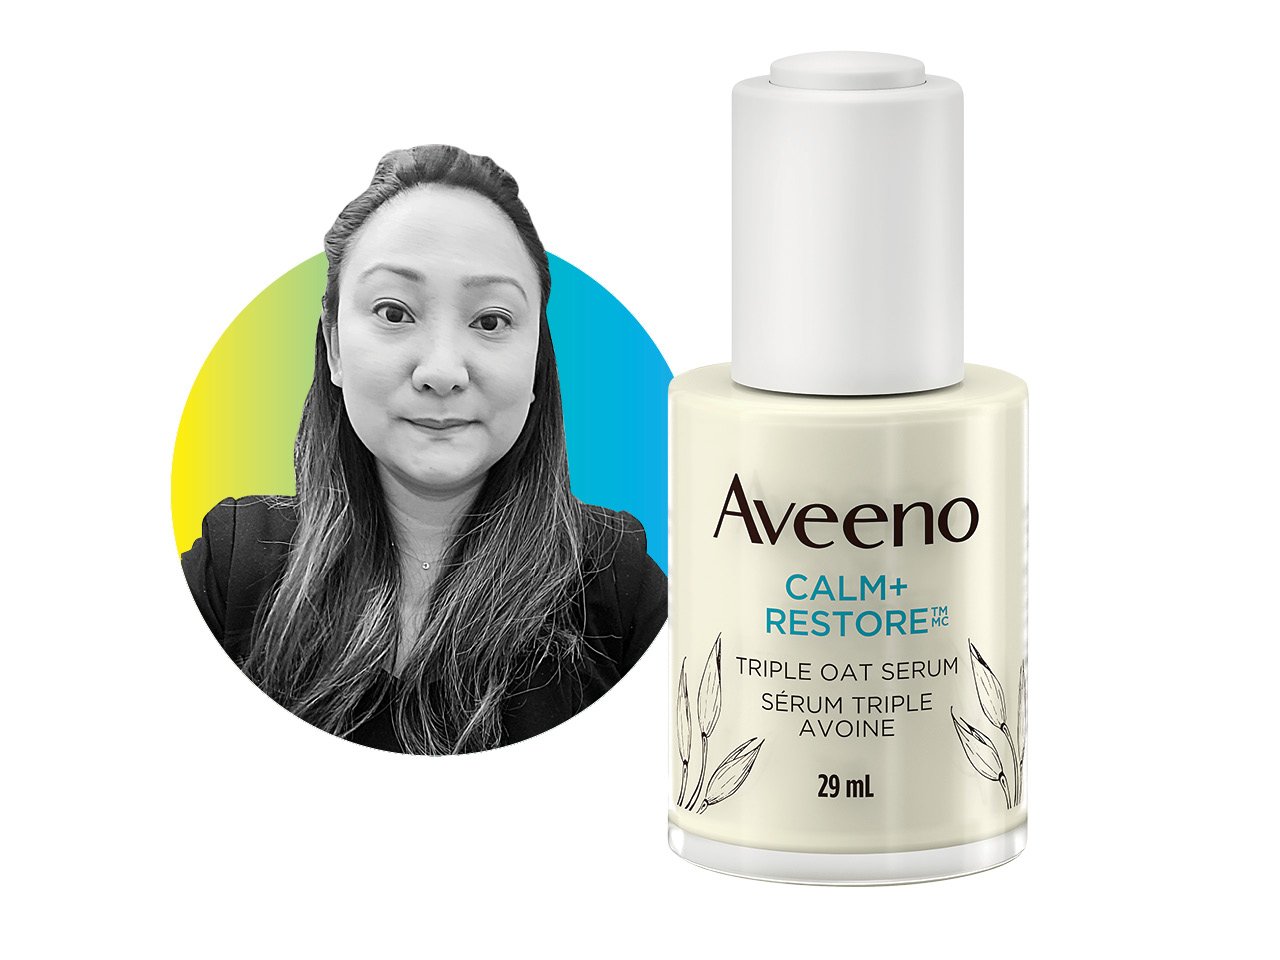 A Chatelaine reader reviews the Aveeno Calm + Restore Triple Oat Serum.